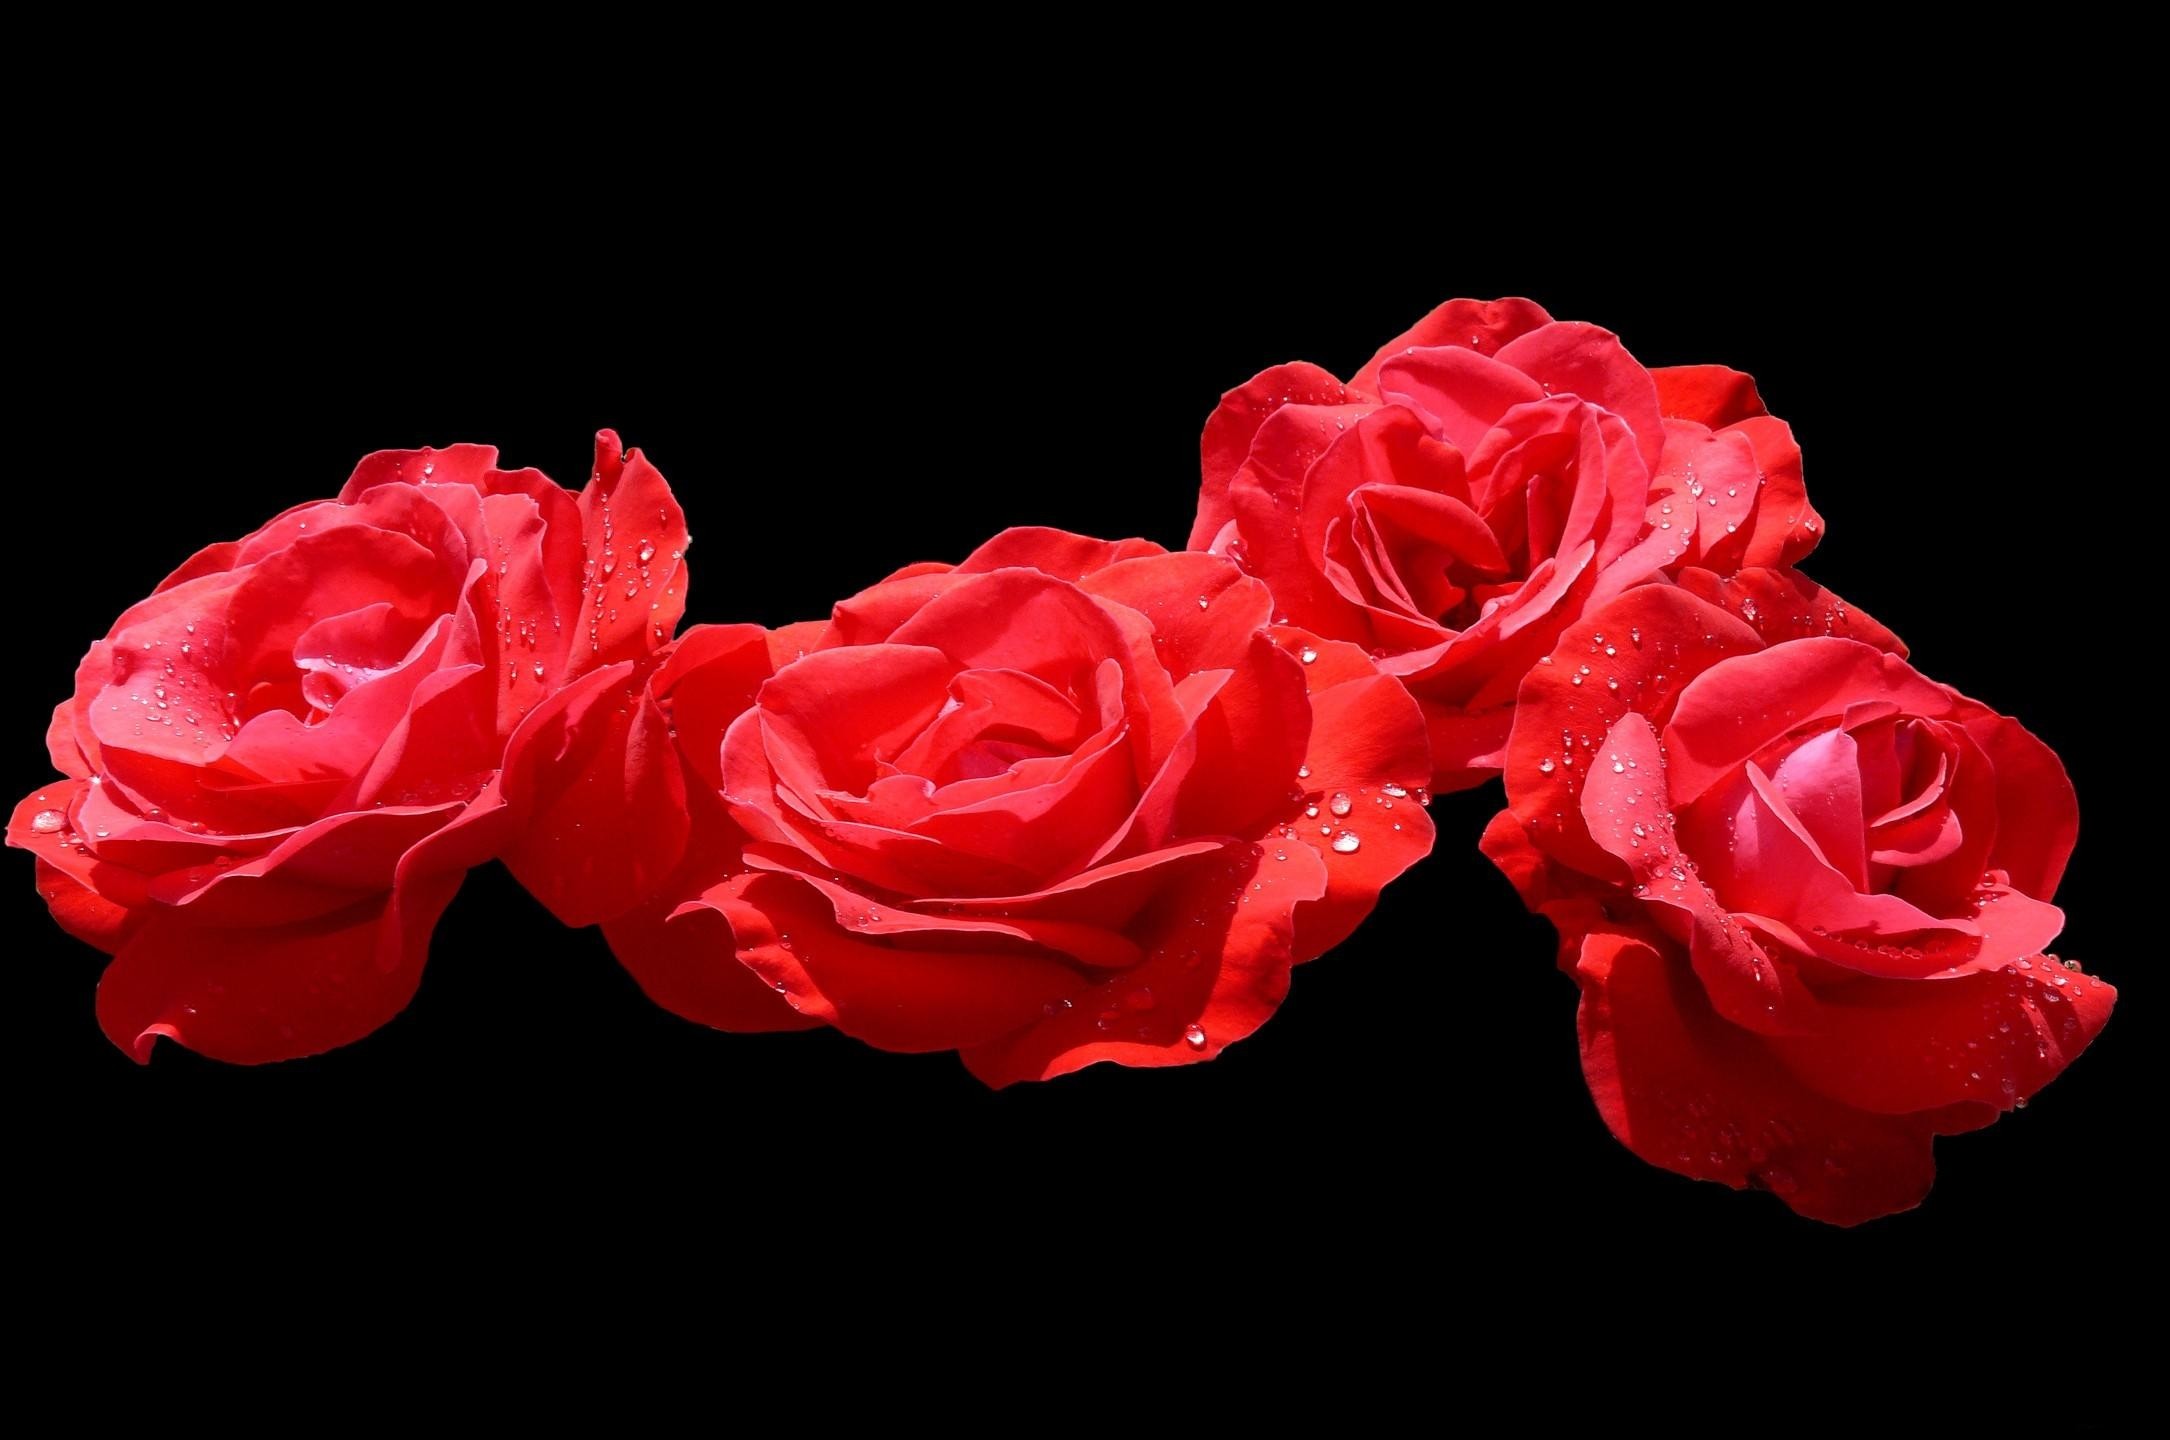 Red Rose With Black Background 42 Images